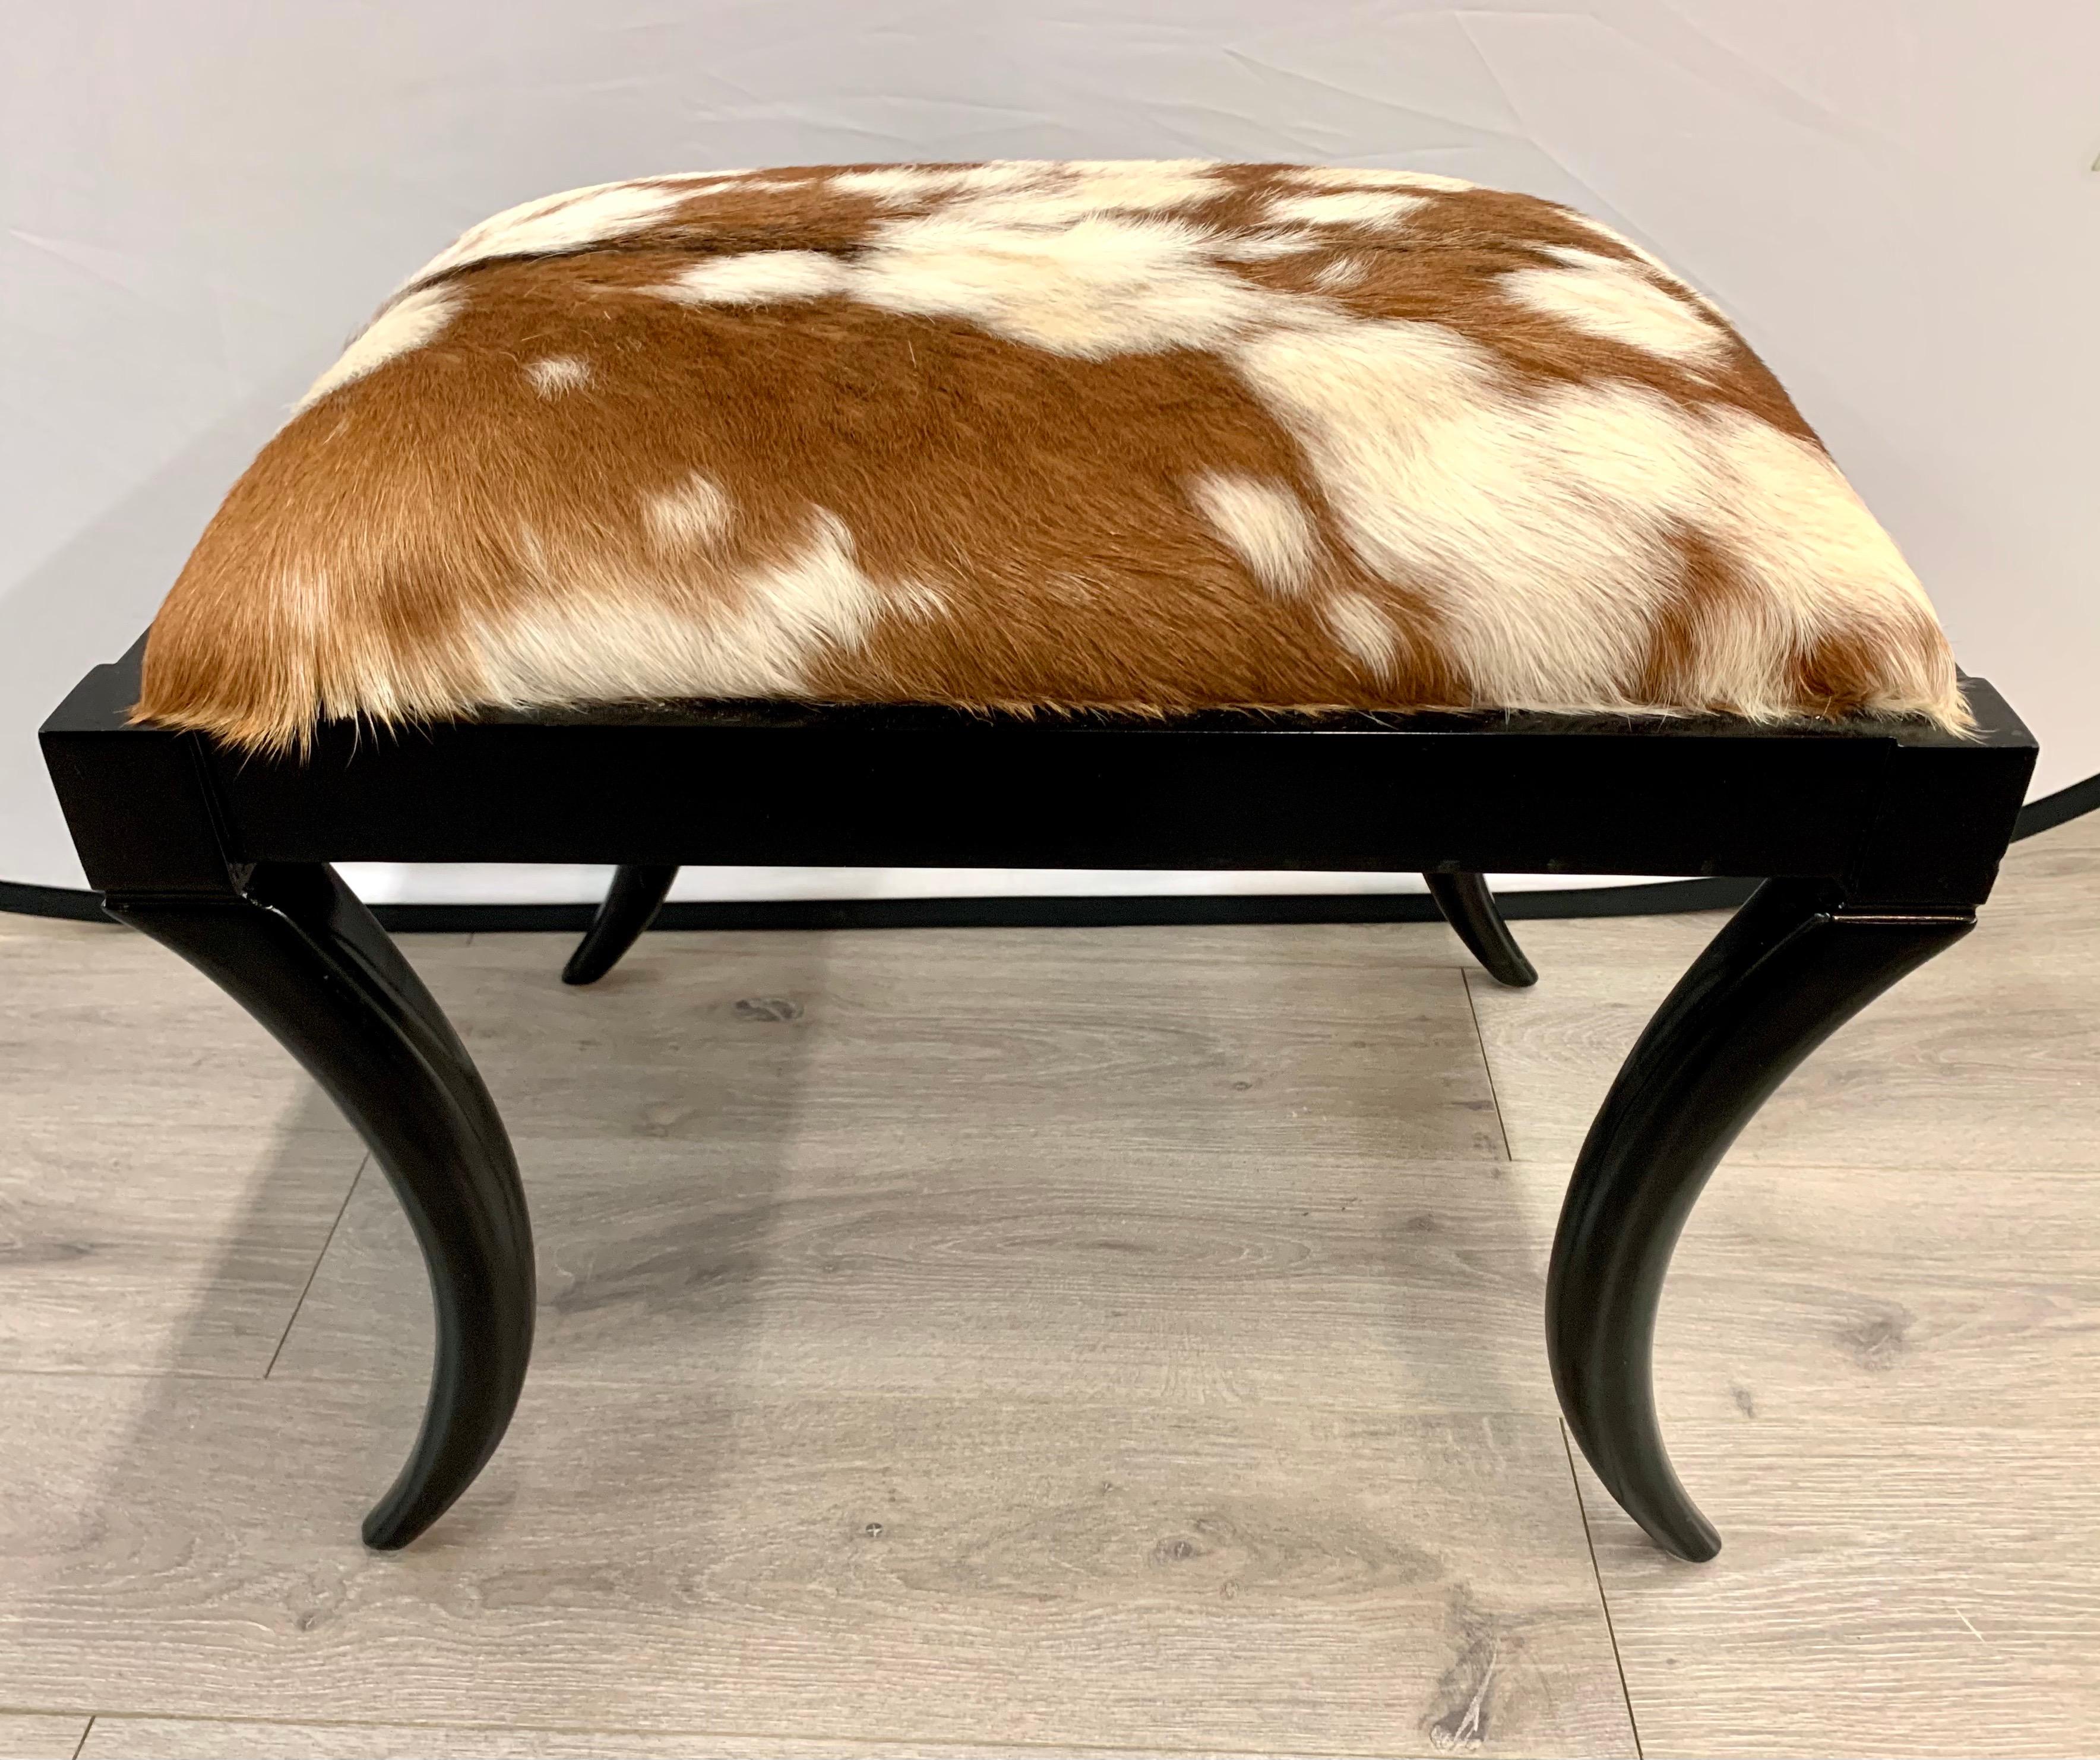 Newer upholstered cowhide adorns this bench or stool. Great scale and better lines.
Now, more than ever, home is where the heart is.